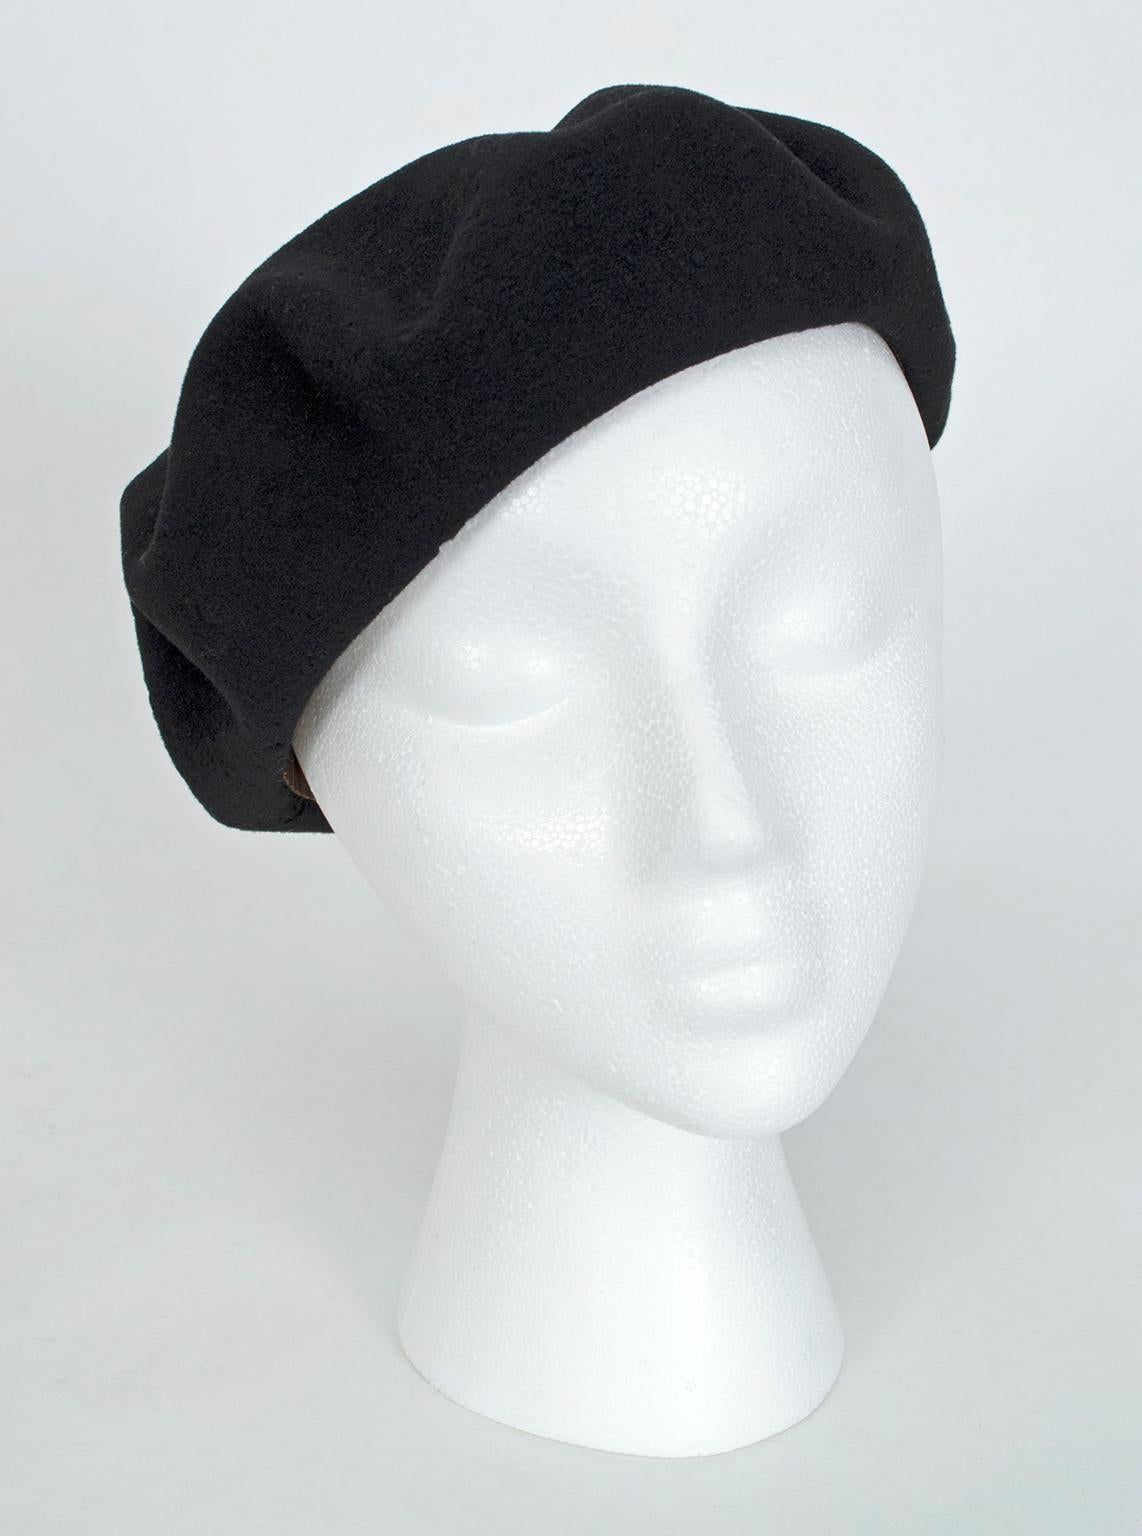 Based in Oloron-Sainte-Marie at the foothills of the Pyrenees, Héritage par Laulhère has produced the finest wool berets in the world since 1840. The company’s highest quality Basque beret, the Campan weighs 20 grams more than comparable models and